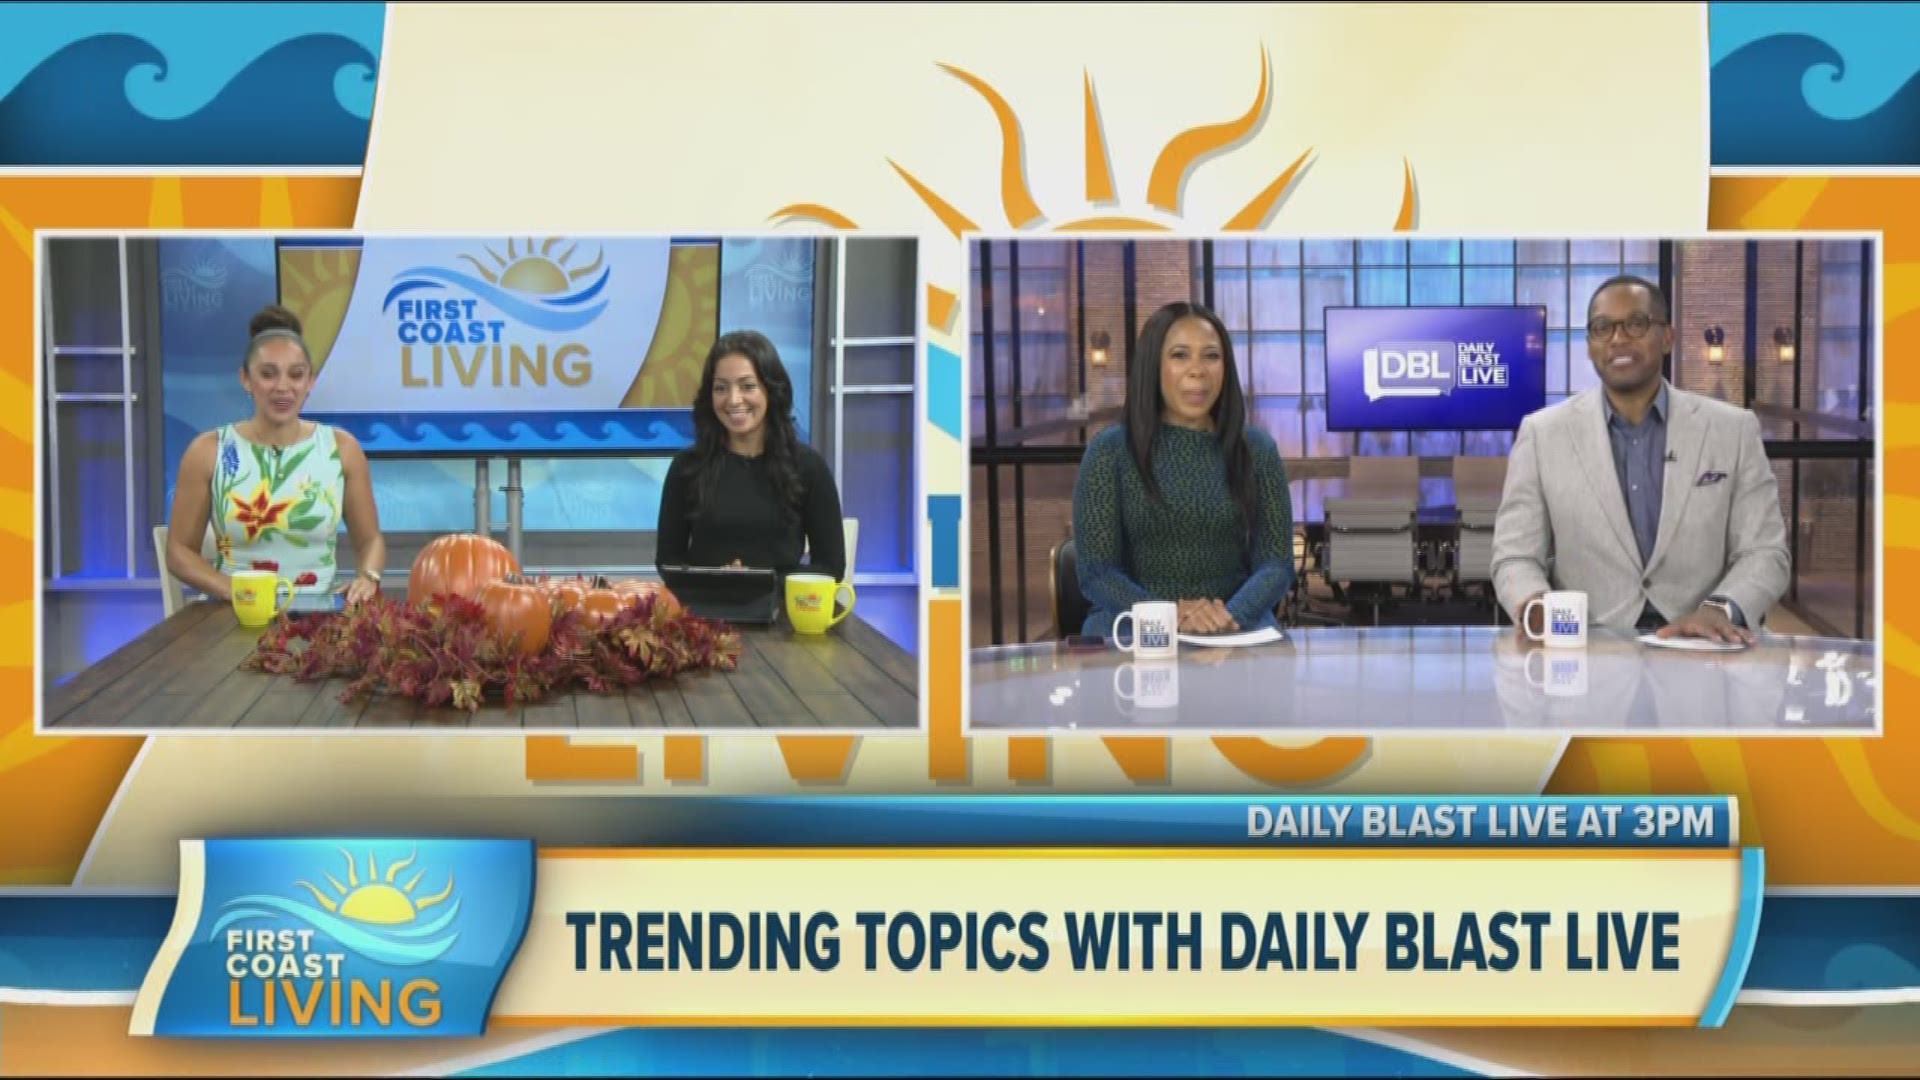 Daily Blast Live hosts share their thoughts on the LA Kings superstition that Taylor Swift Banner is bringing bad luck.